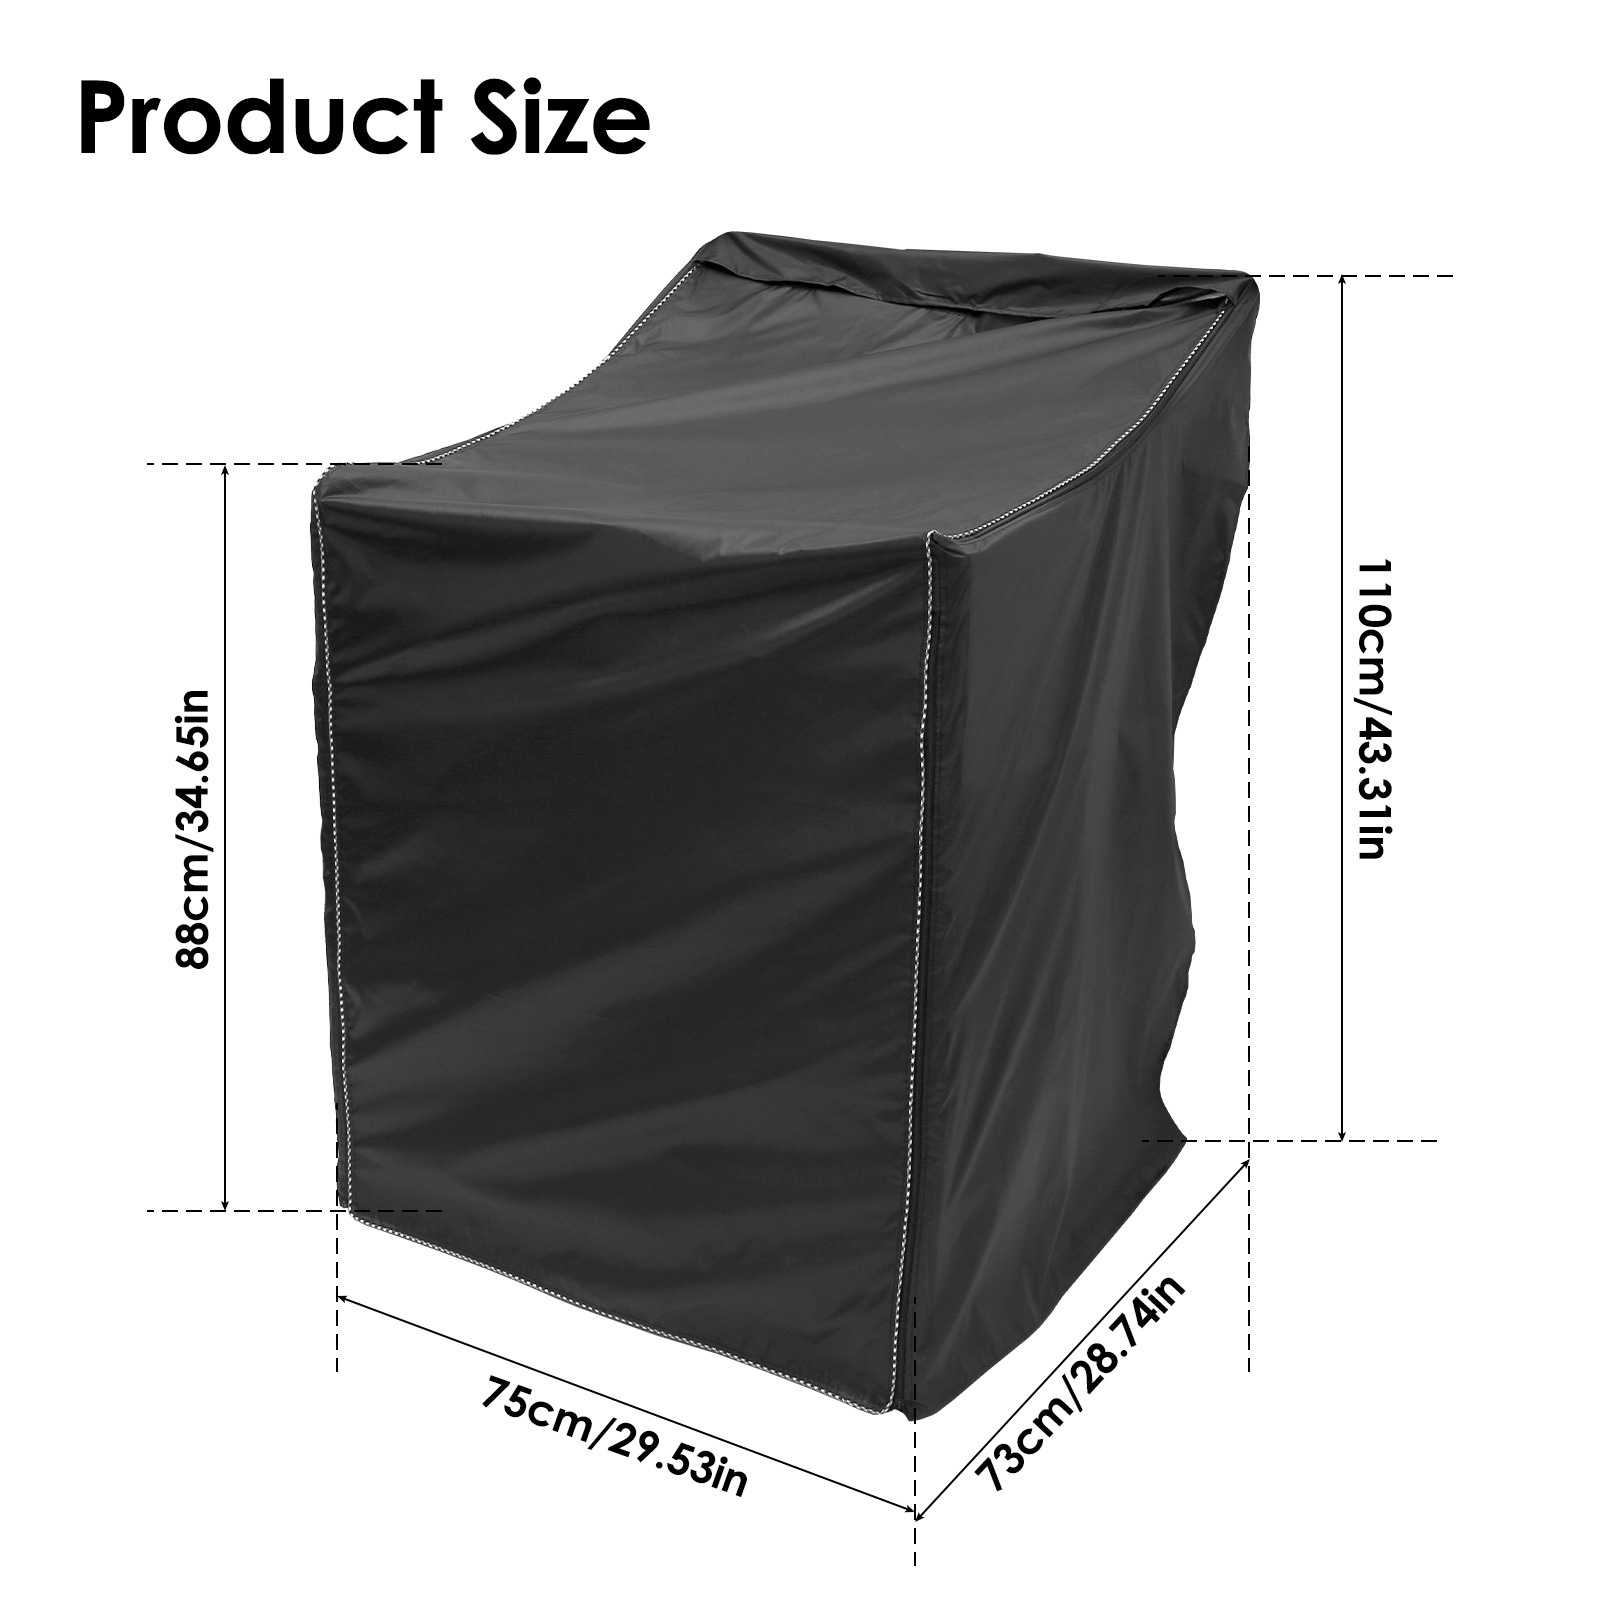  Washer/Dryer Cover,Fit for Outdoor Top Load and Front Load  Machine,Zipper Design for Easy Use,Waterproof Dust-proof Moderately  Sunscreen (Green Forest) : Appliances